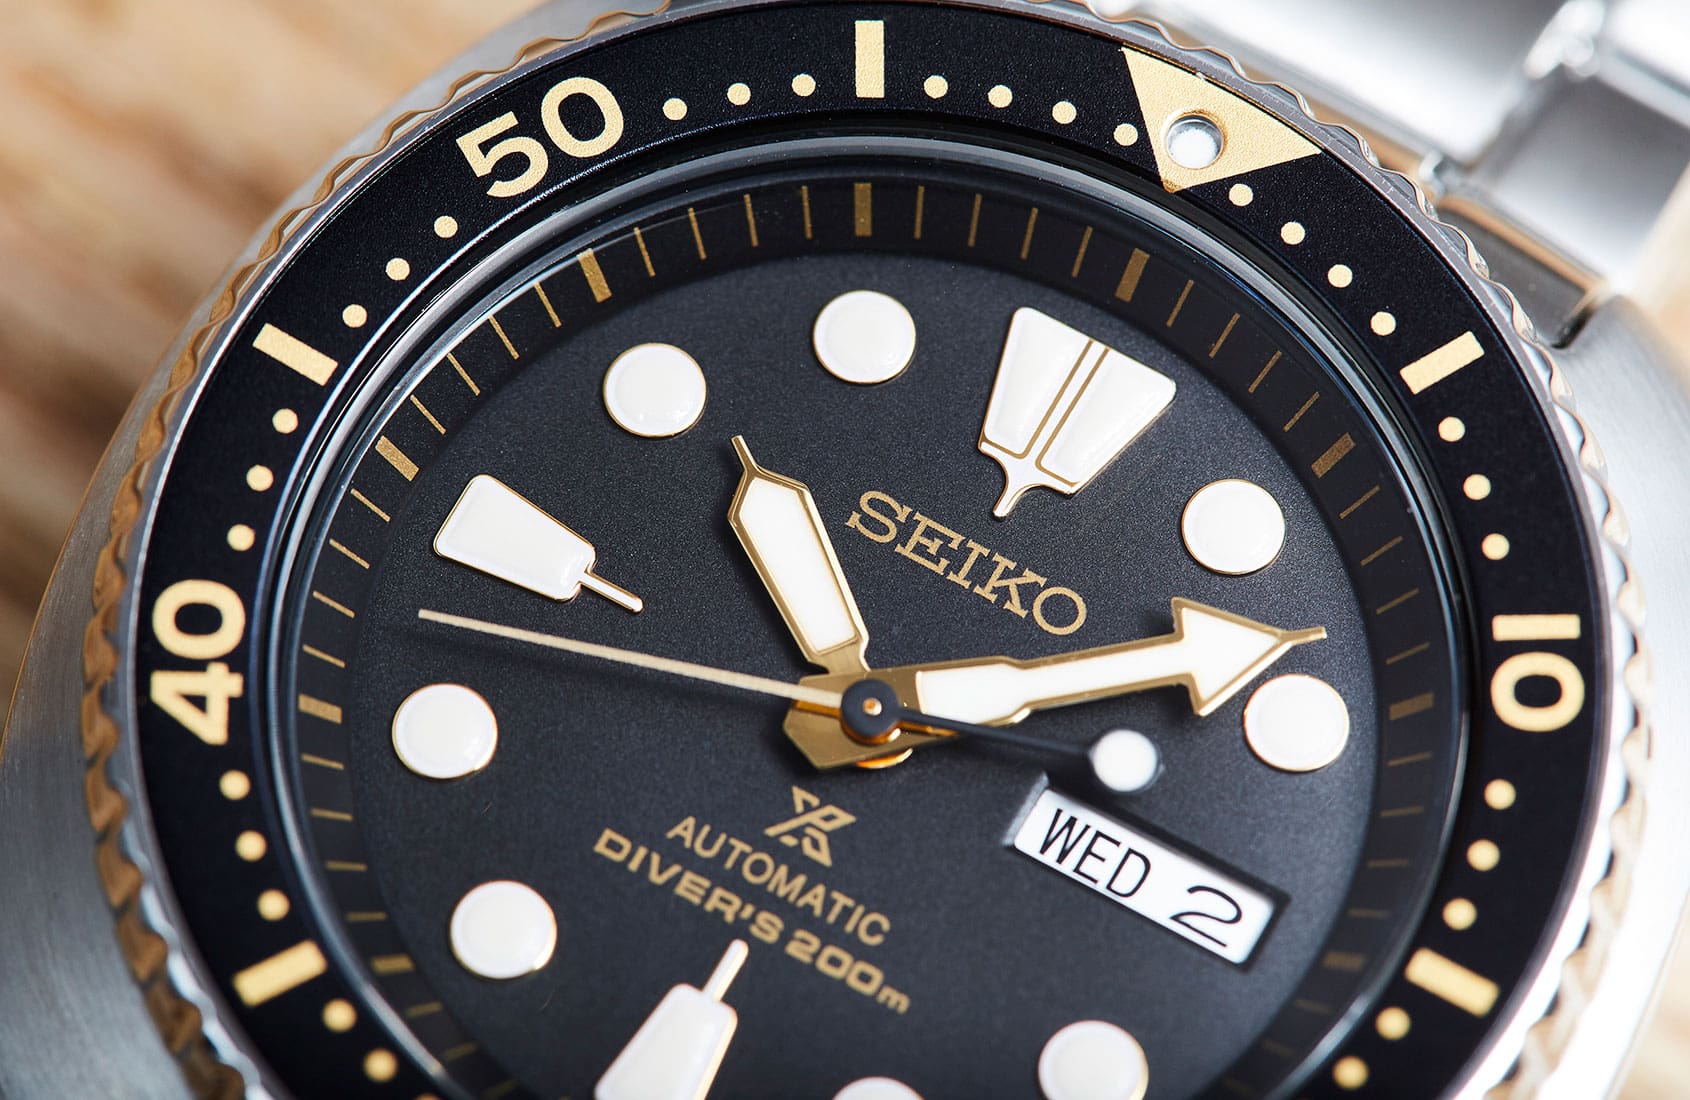 EDITOR’S PICK: Turtle power! We review Seiko’s Prospex SRP77X divers